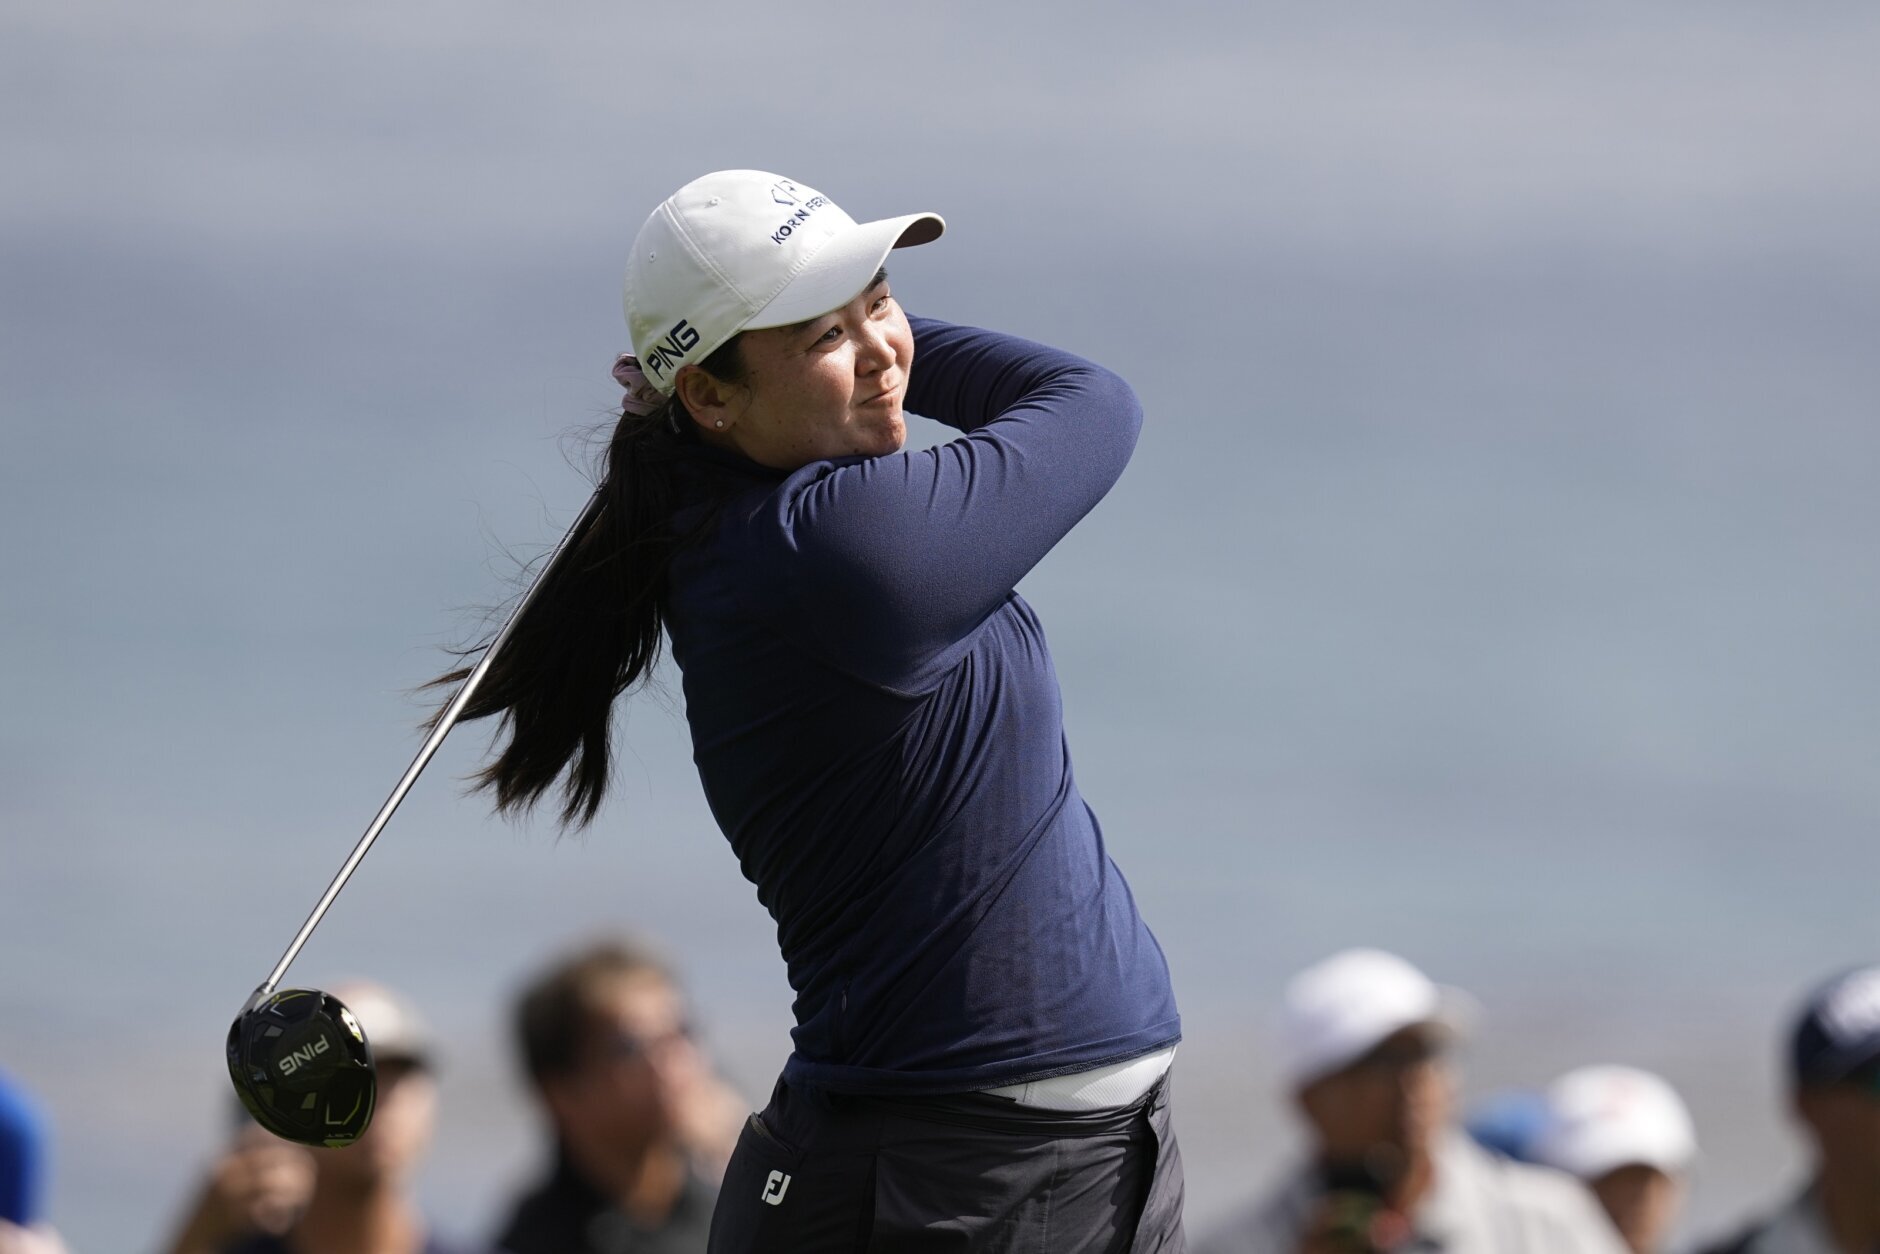 Allisen Corpuz wins the US Womens Open at Pebble Beach for her first LPGA title pic